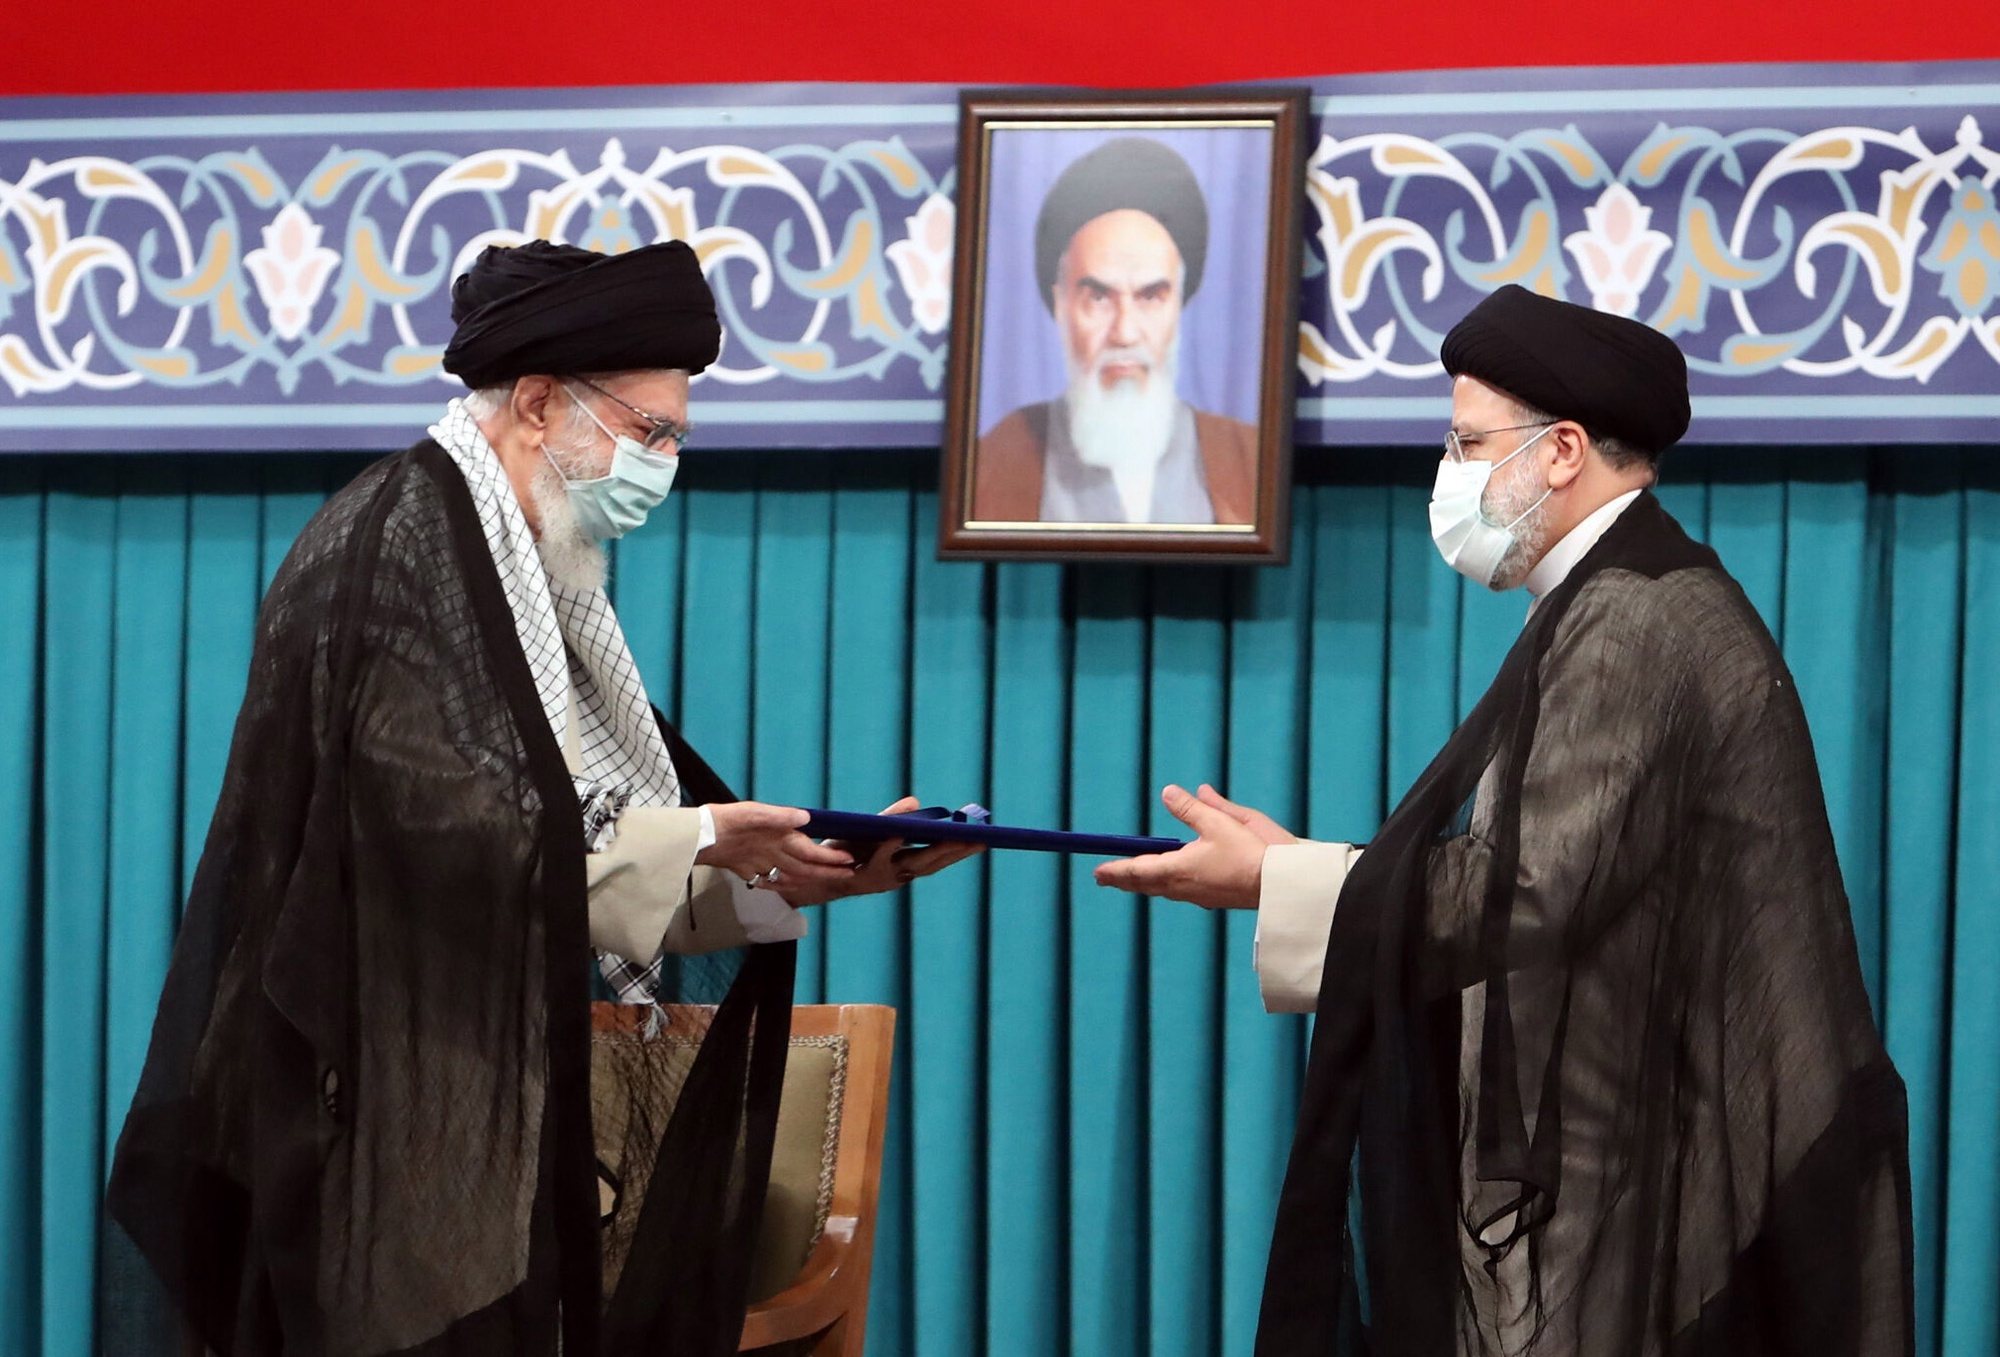 epa09389894 A handout picture made available by Iran&#039;s Supreme Leader Office shows Iranian supreme leader Ayatollah Ali khamenei (L) handing over the presidential precept to new Iranian president Ebrahim Raisi (R), in Tehran, Iran, 03 August 2021. Iranian presidents are first approved by the supreme leader, who according to constitution is the actual head of state, and then take the oath before parliament. Ebrahim Raisi has been inaugurated as the new president of the Islamic Republic of Iran on 03 August 2021, as the country is facing an economic crisis along with the coronavirus disease (COVID-19) pandemic.  EPA/IRAN&#039;S SUPREME LEADER OFFICE HANDOUT  HANDOUT EDITORIAL USE ONLY/NO SALES